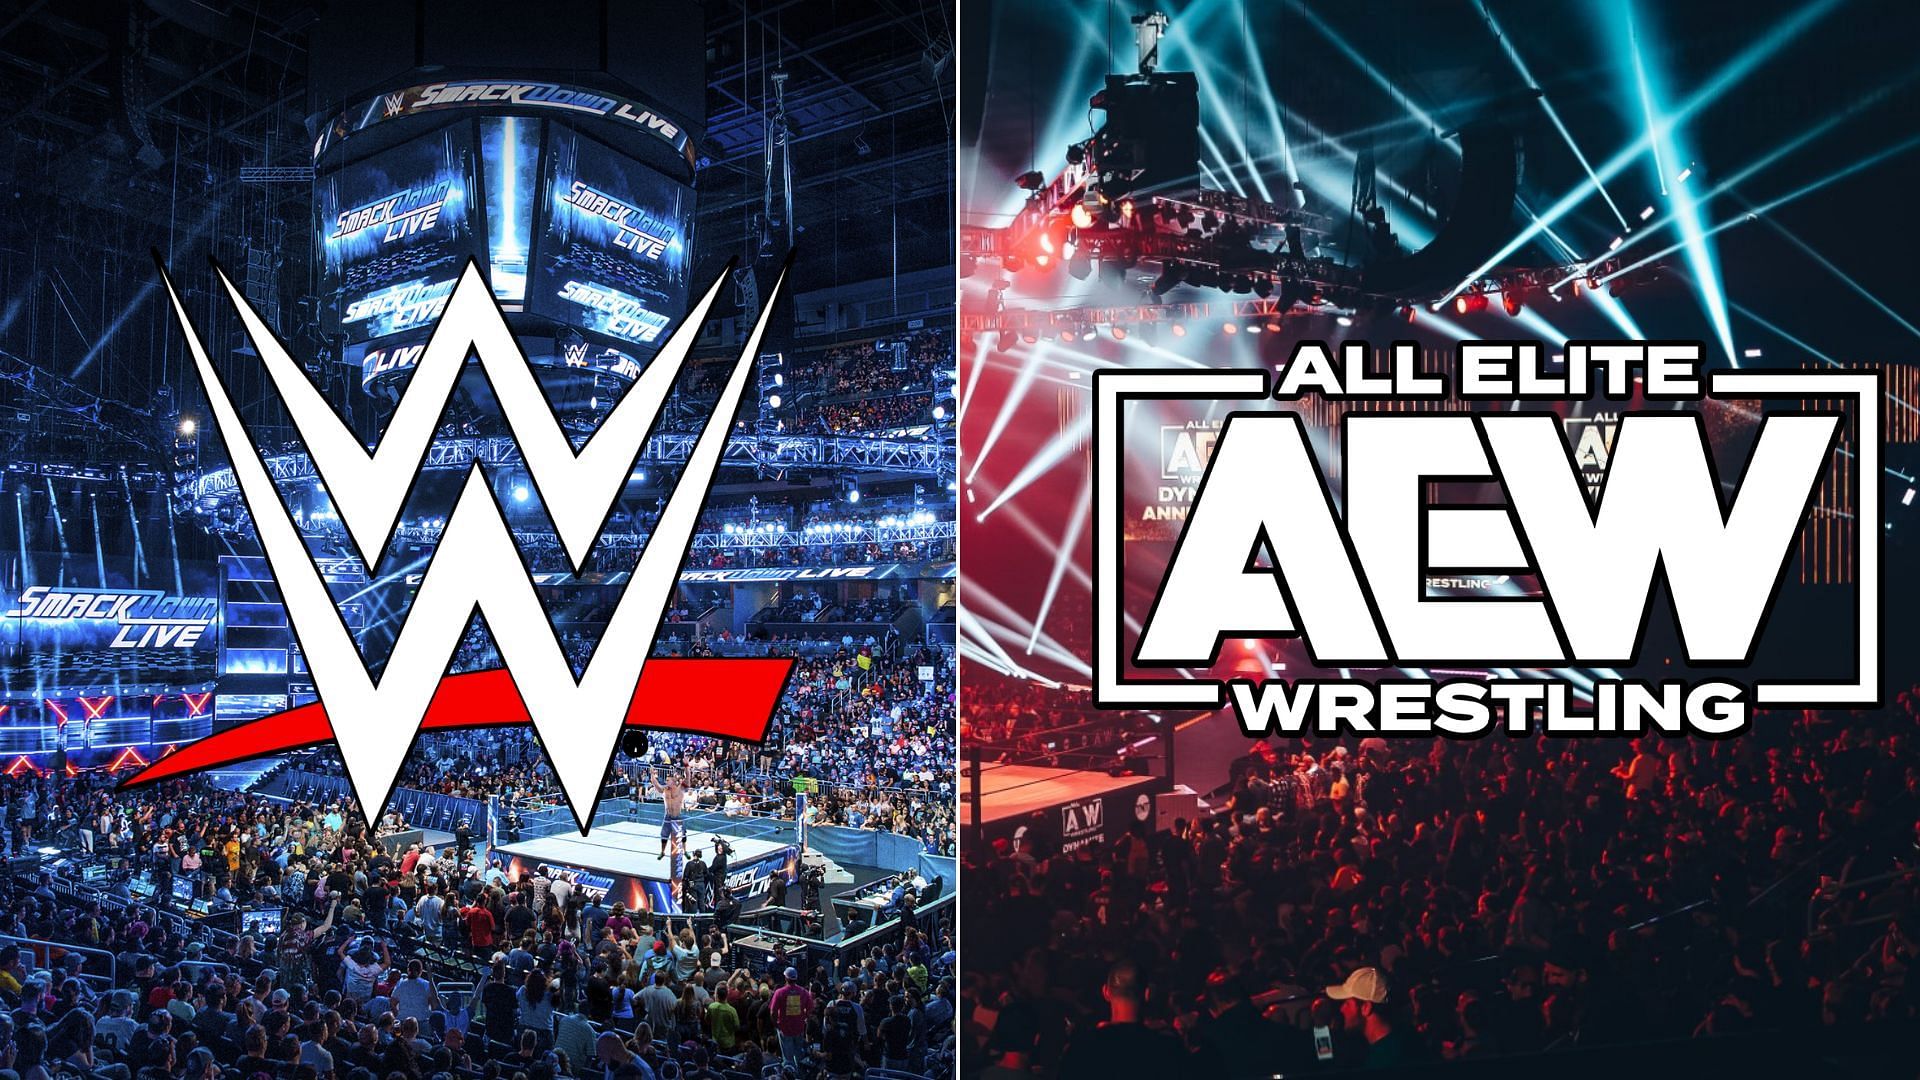 Do the AEW and WWE audiences have more in common than they realize?